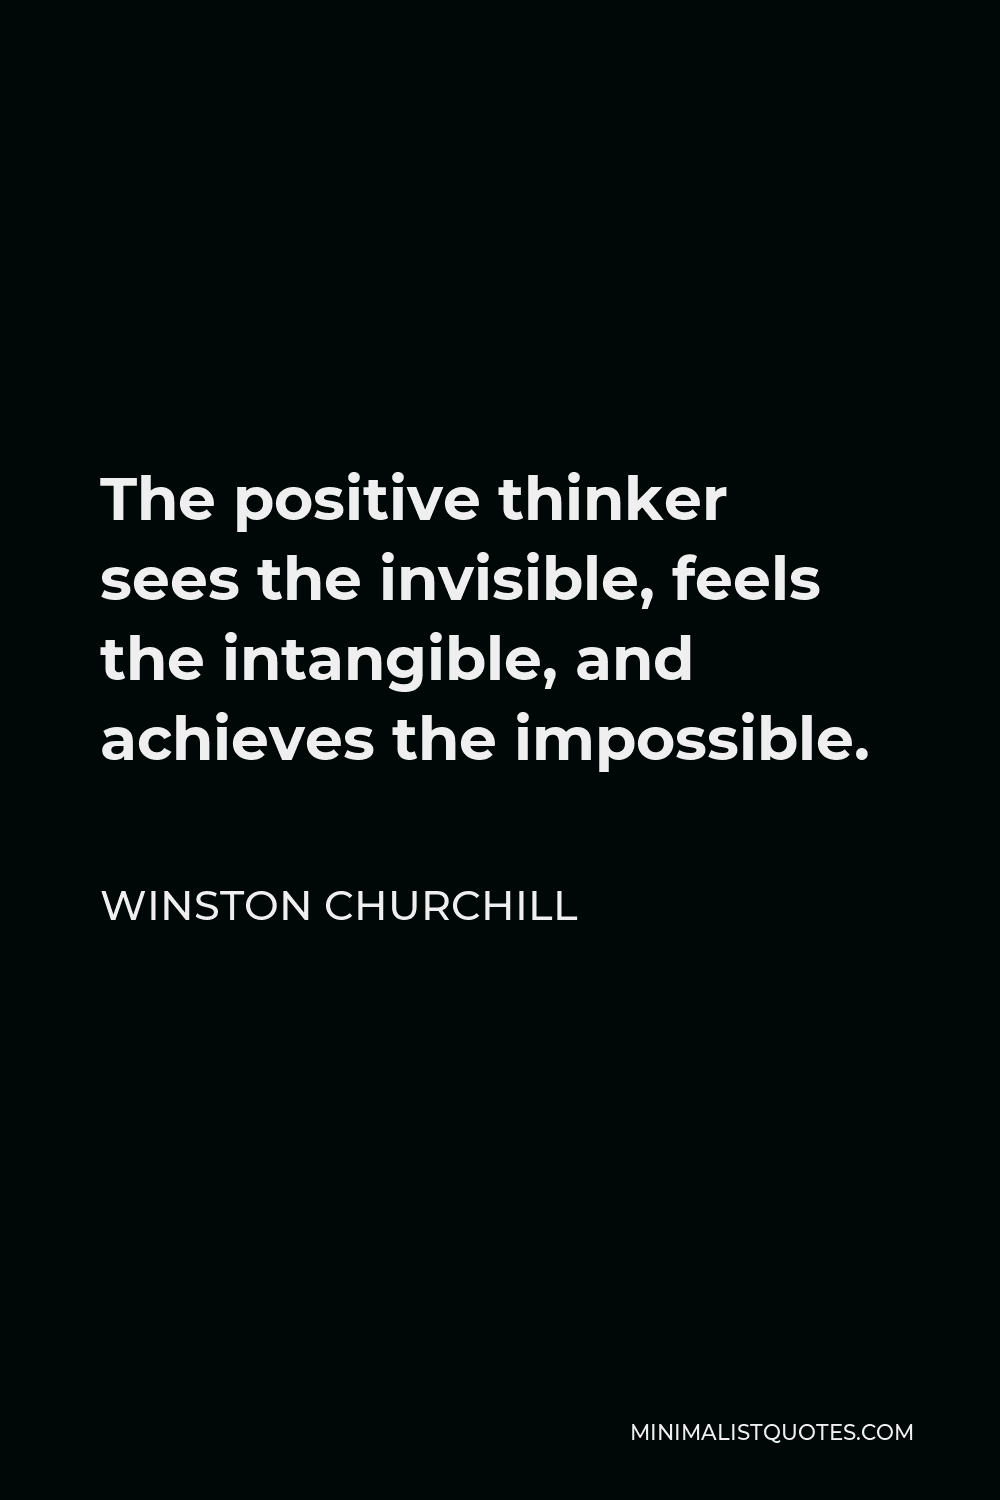 Winston Churchill Quote - The positive thinker sees the invisible, feels the intangible, and achieves the impossible.